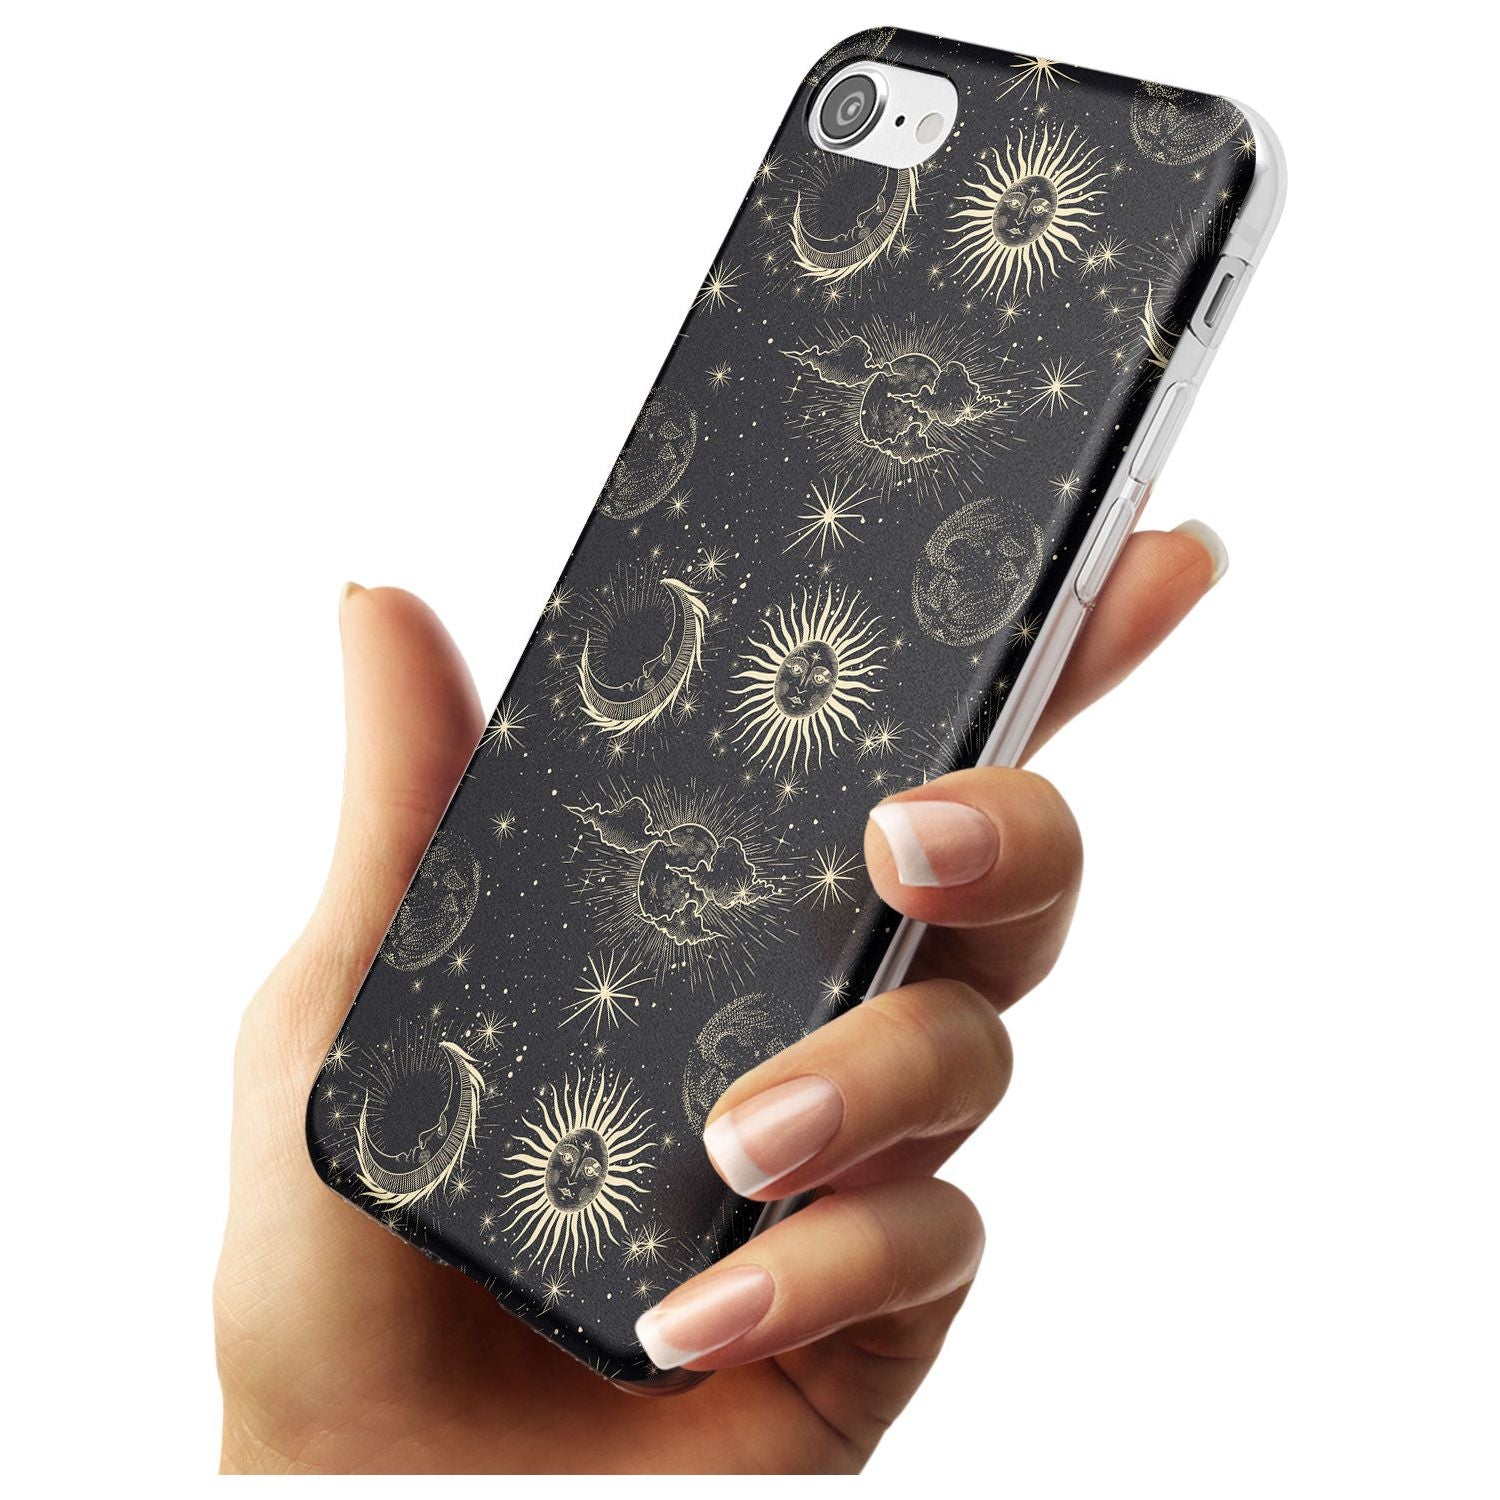 Large Suns, Moons & Clouds Black Impact Phone Case for iPhone SE 8 7 Plus